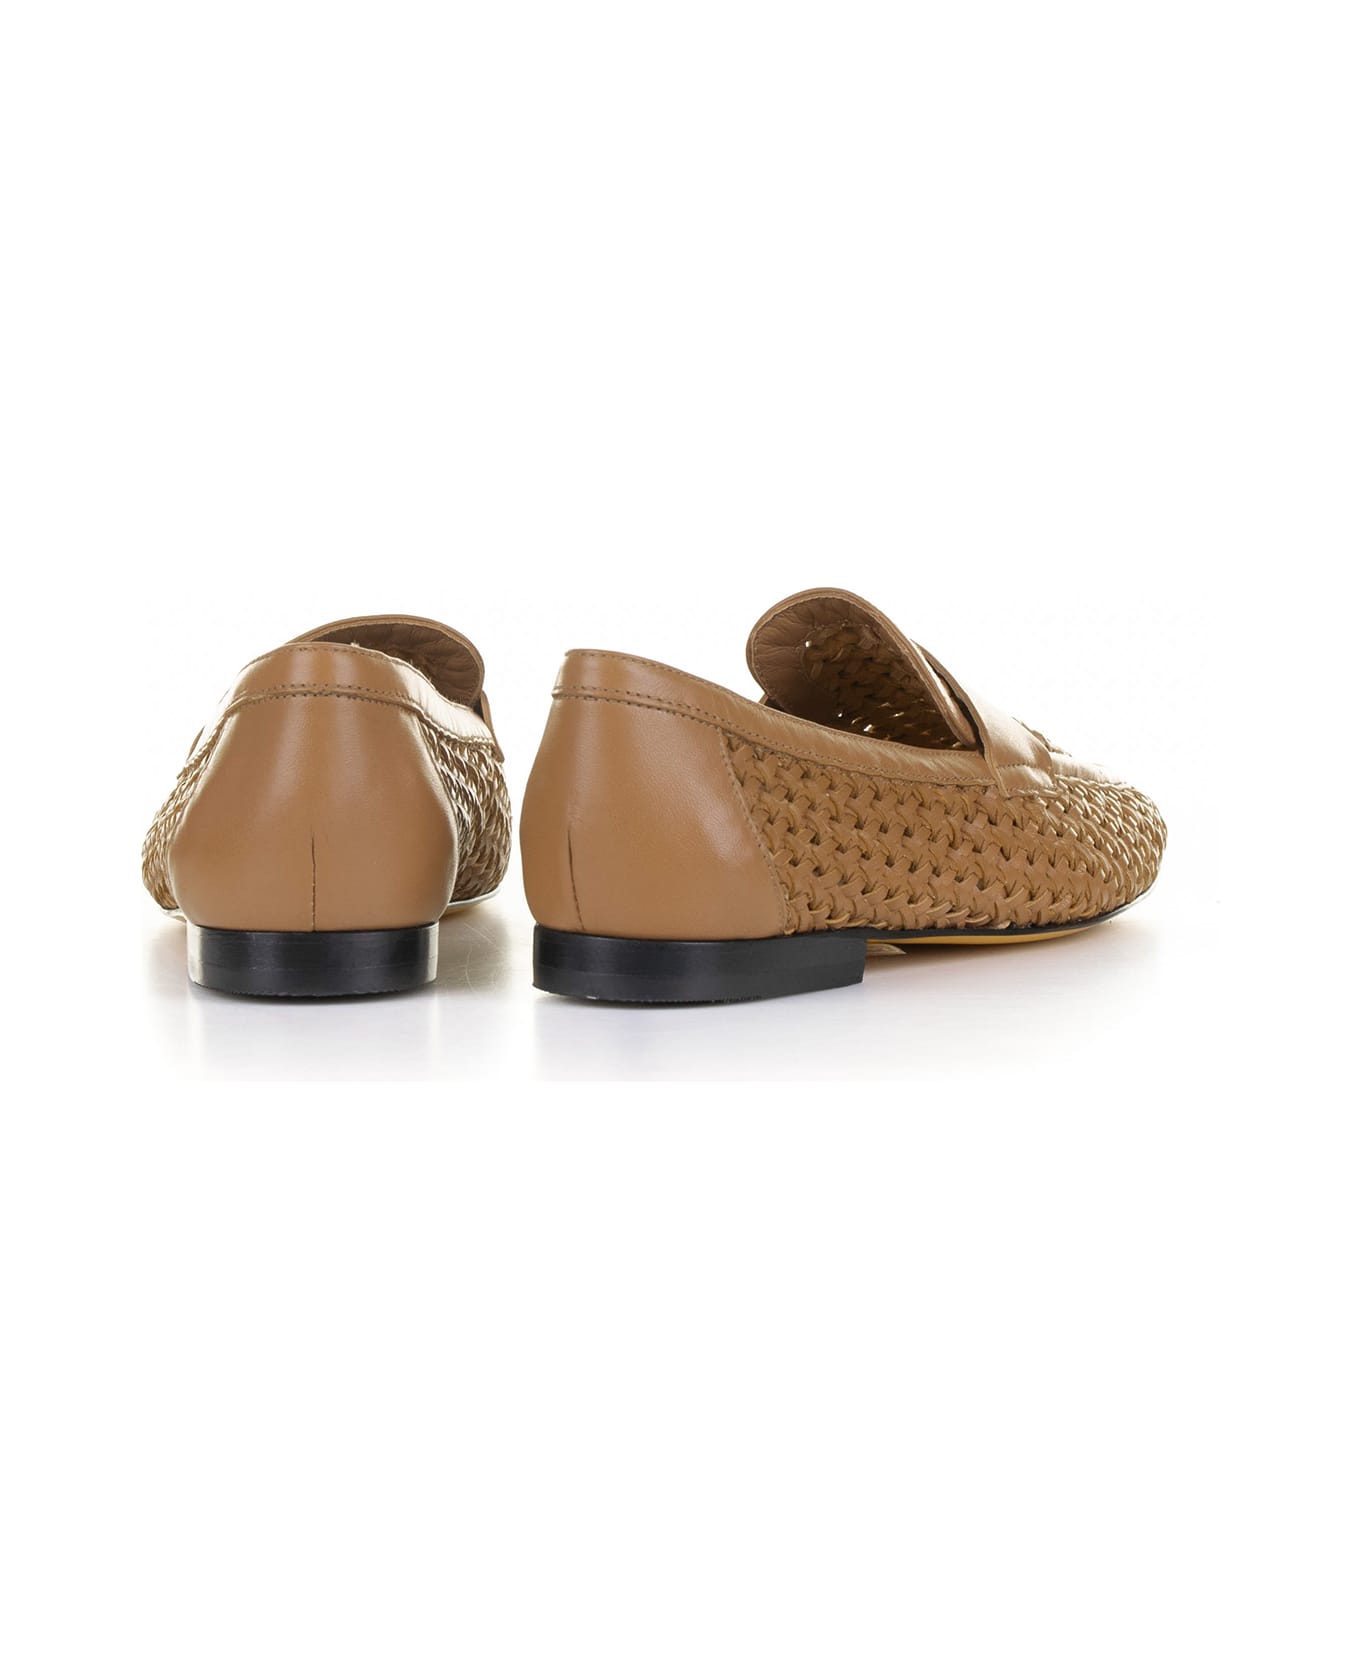 Doucal's Woven Leather Moccasin - NOCE フラットシューズ